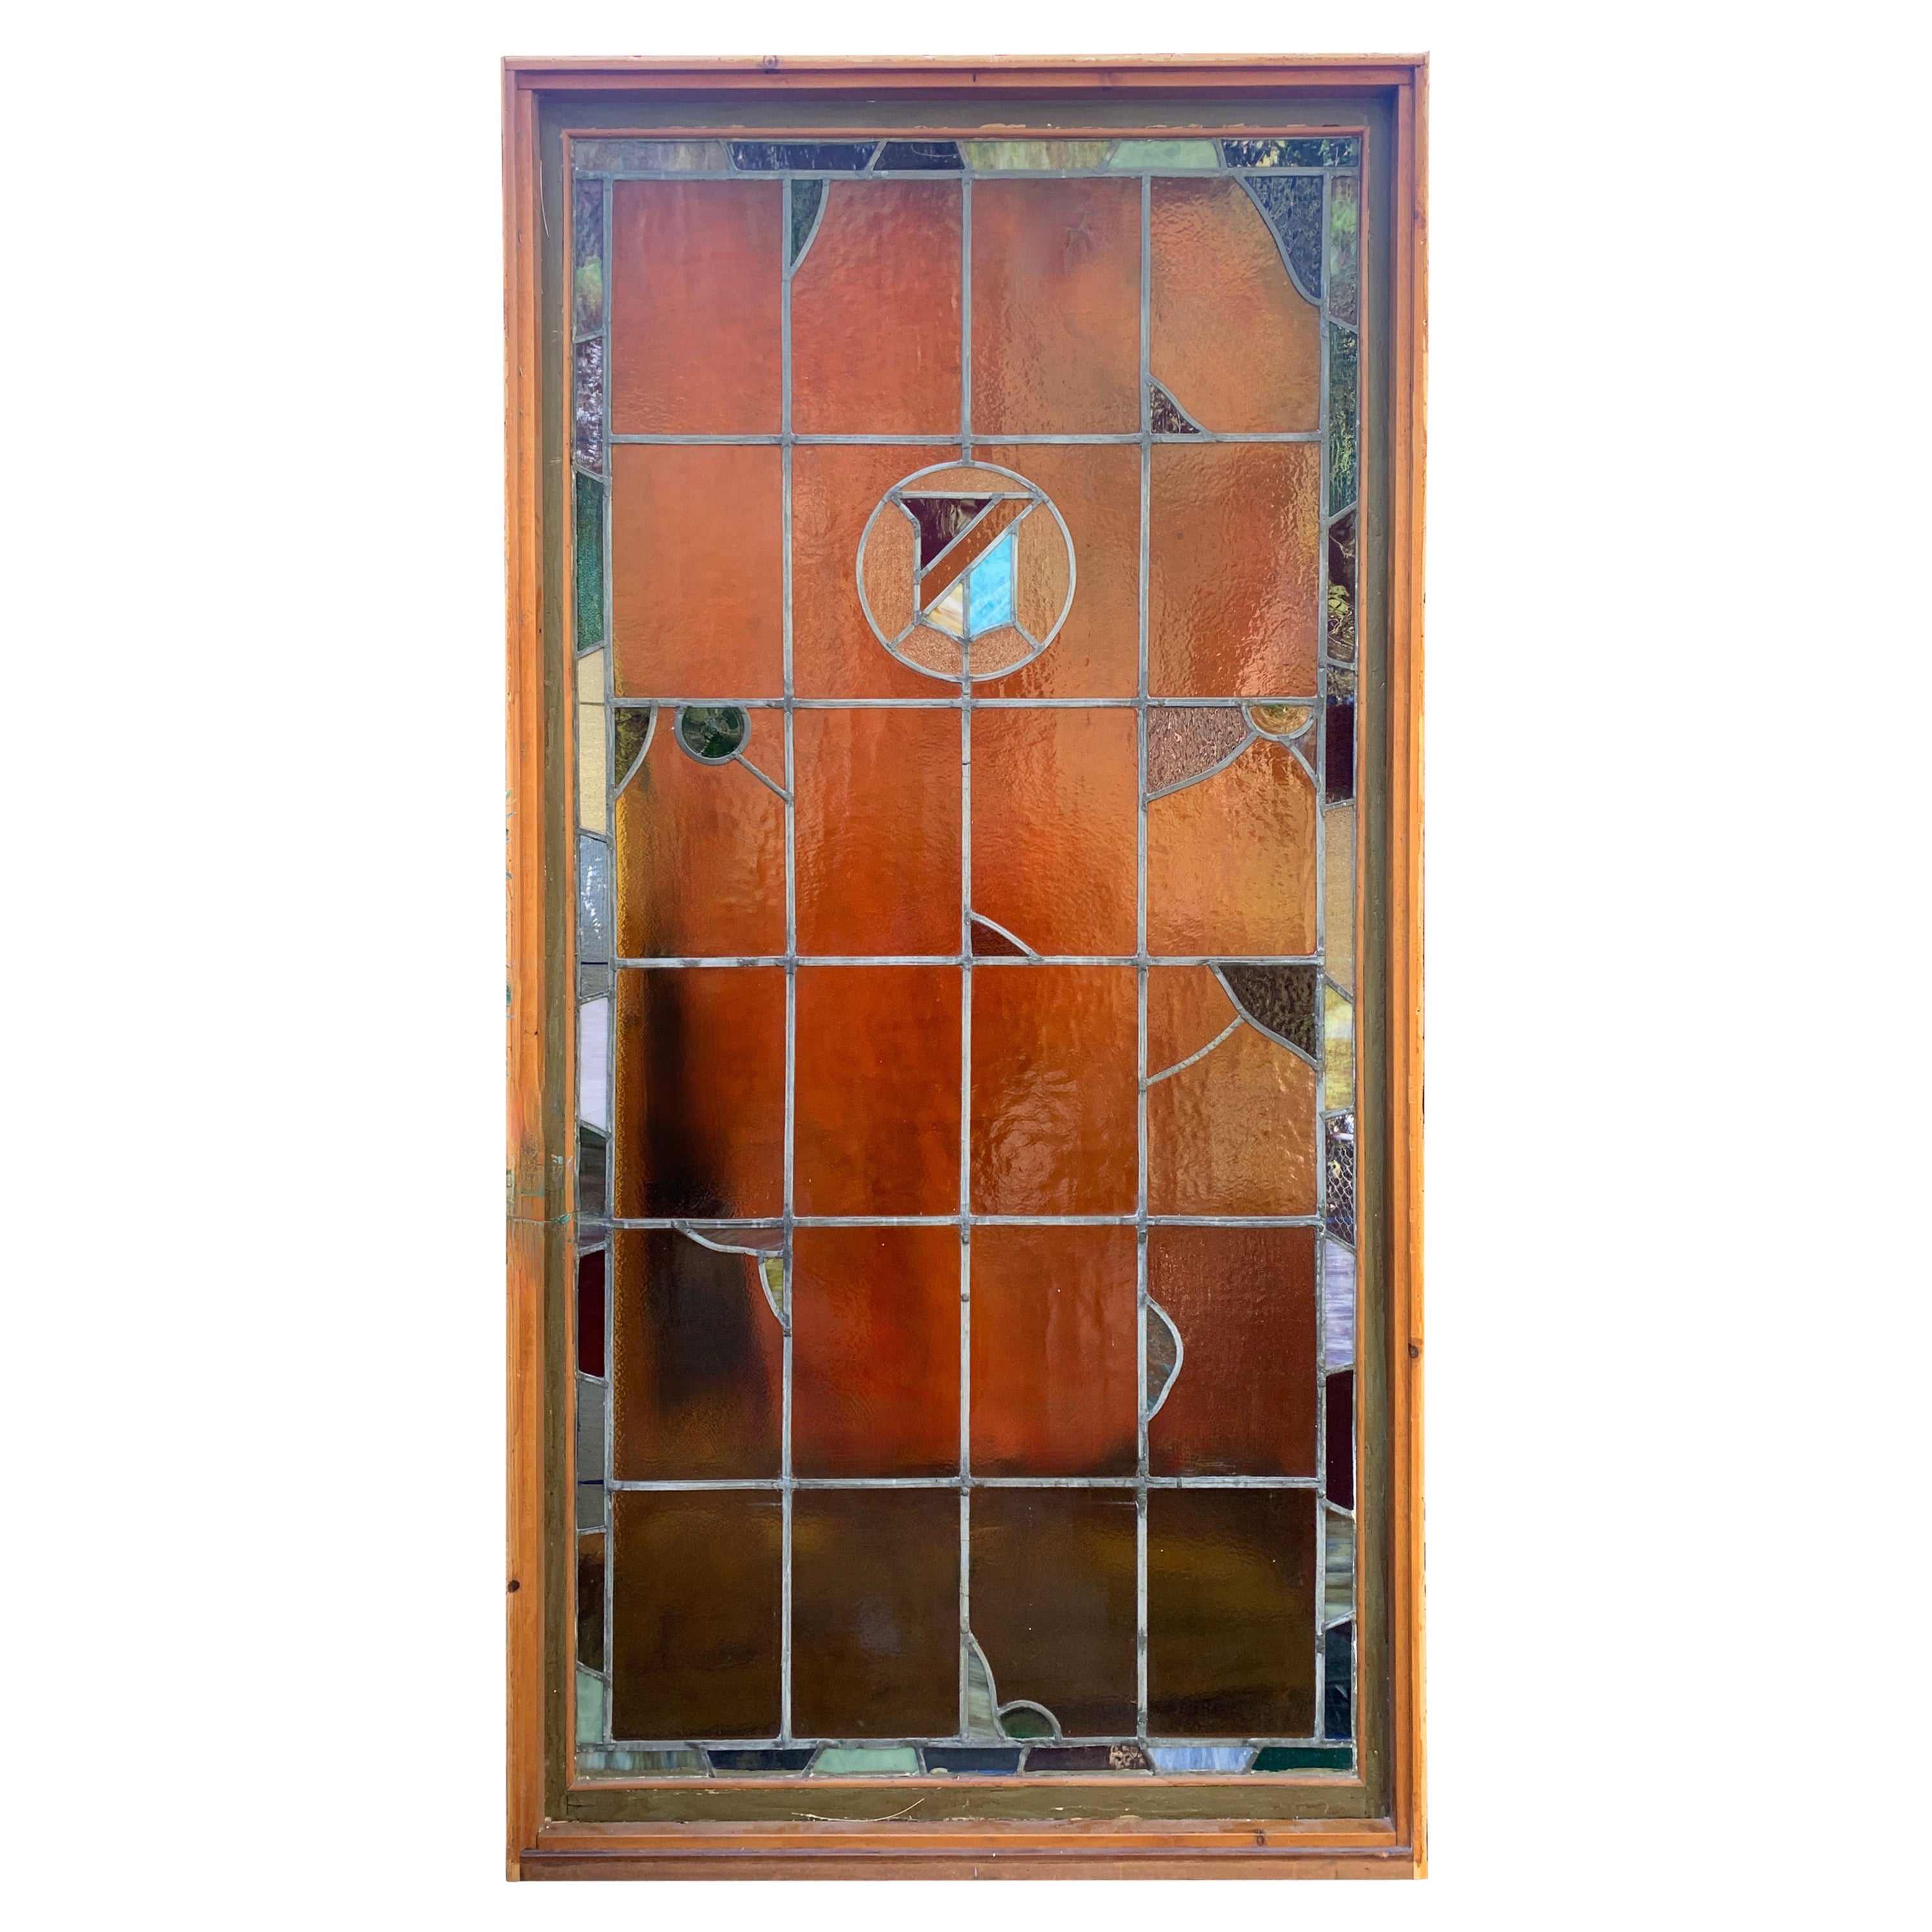 Architectural Stained Glass Window in Frame